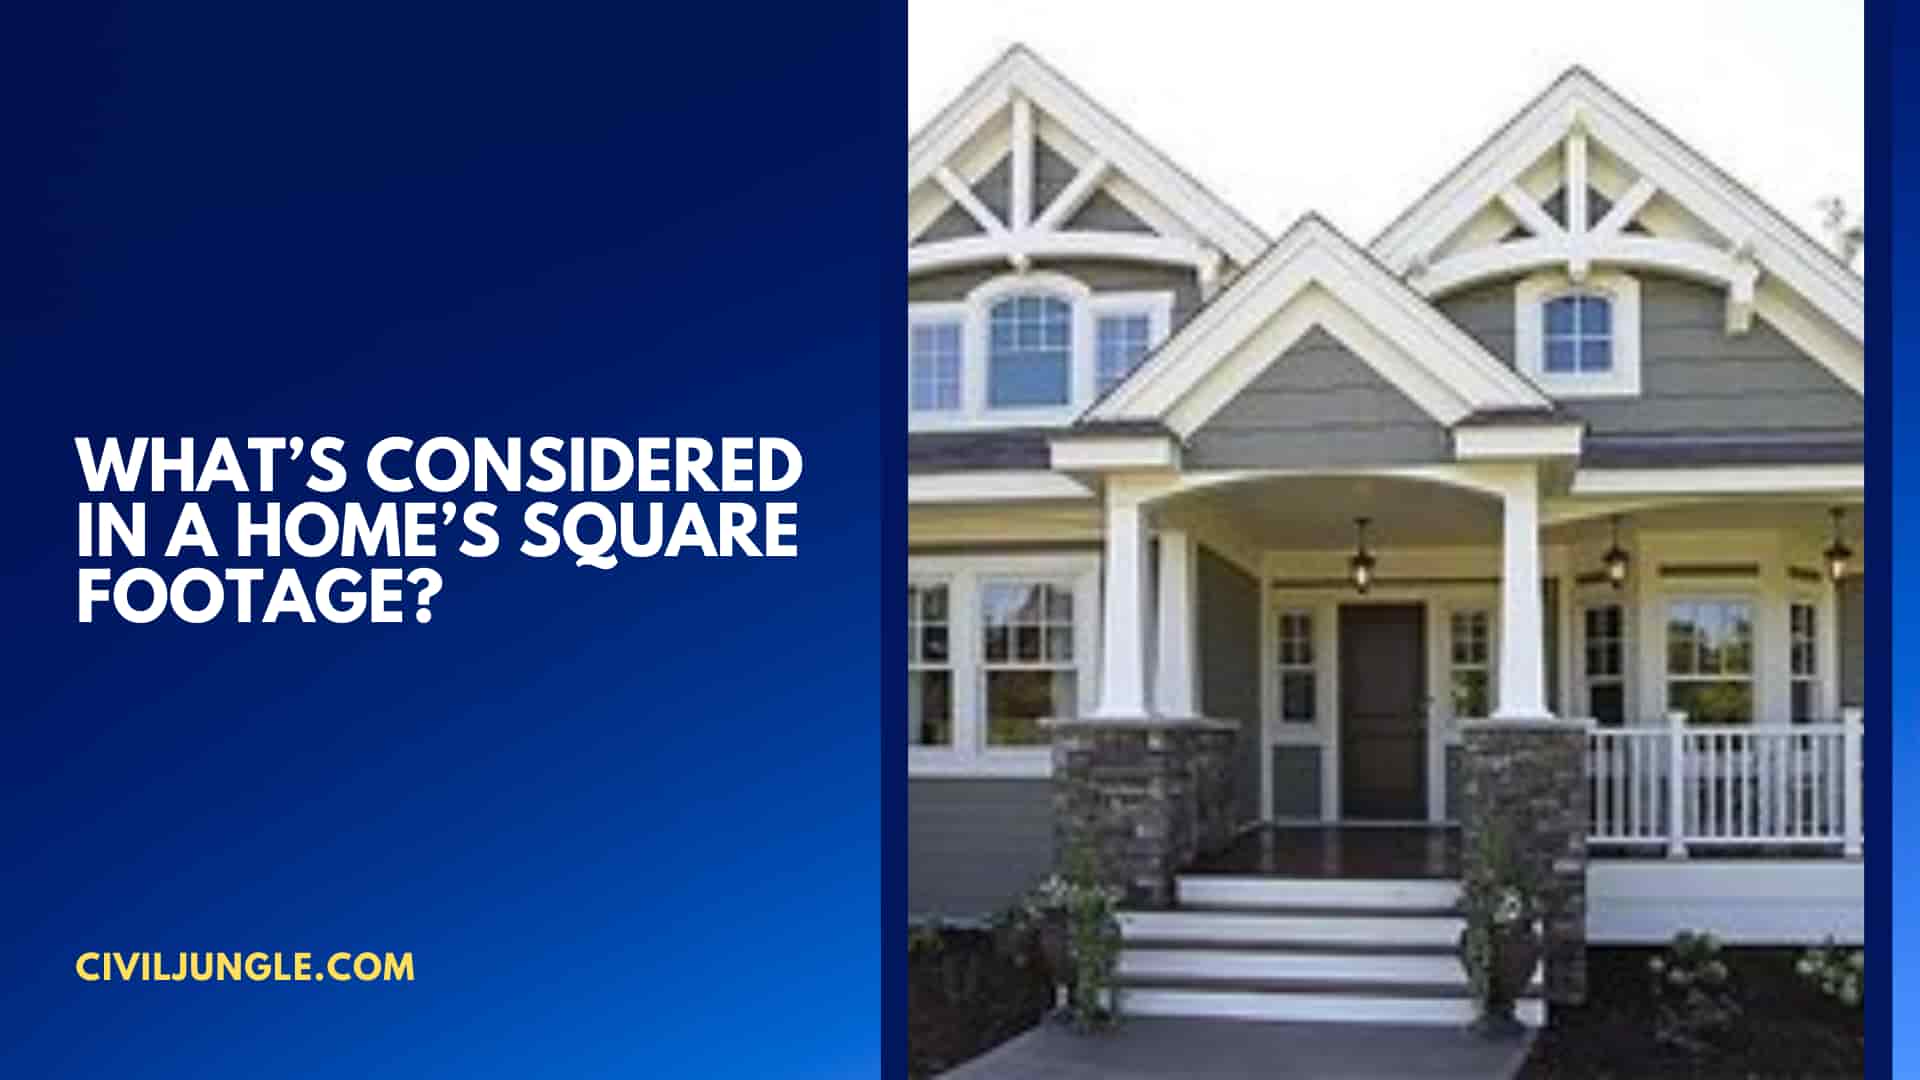 What’s Considered in a Home’s Square Footage?